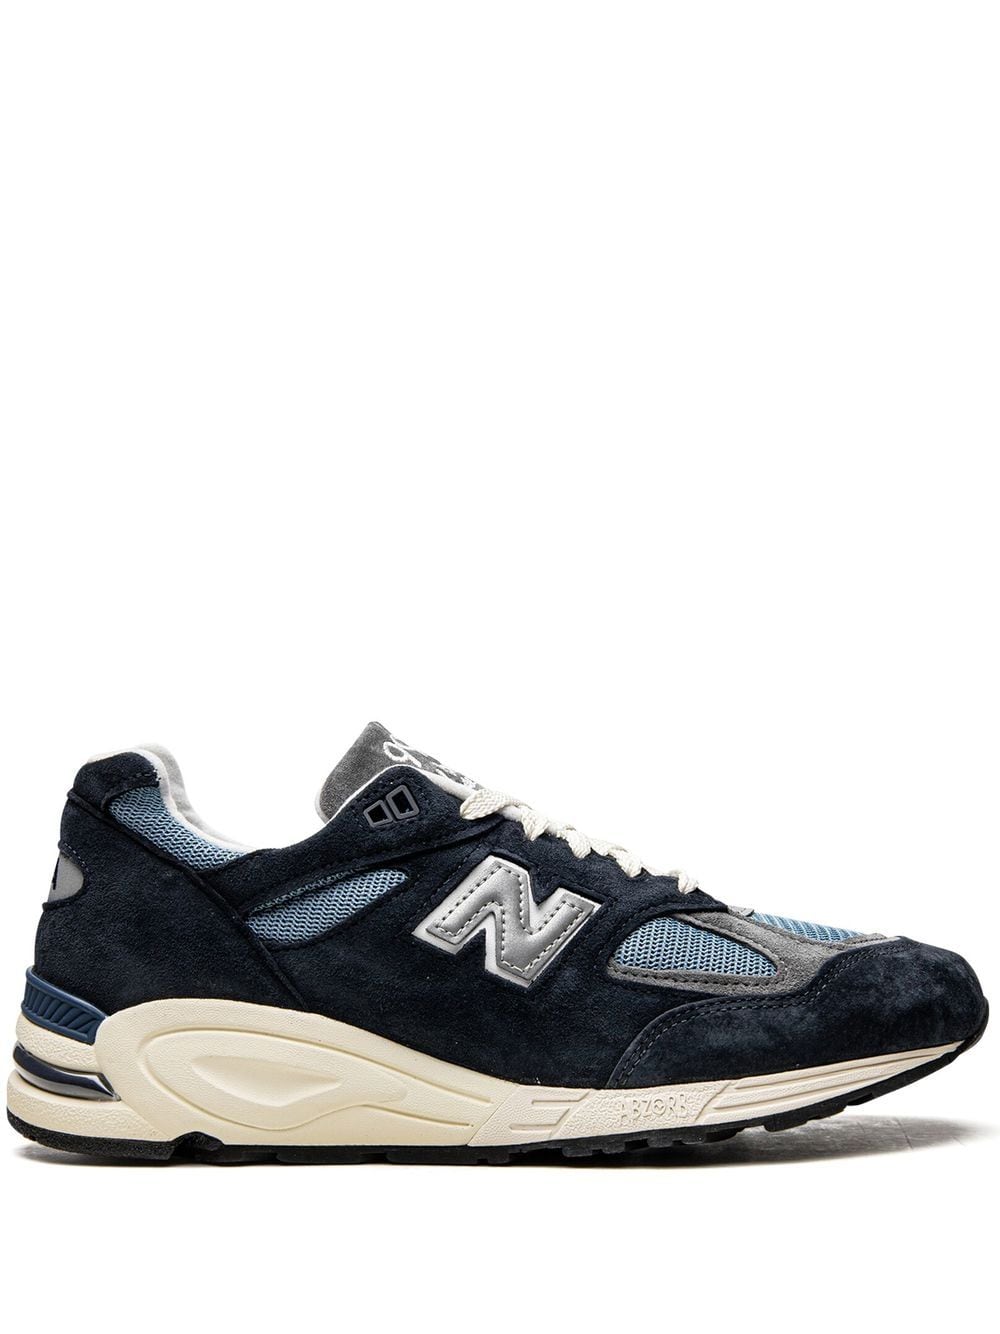 New Balance Made In USA 990v2 sneakers - Blue